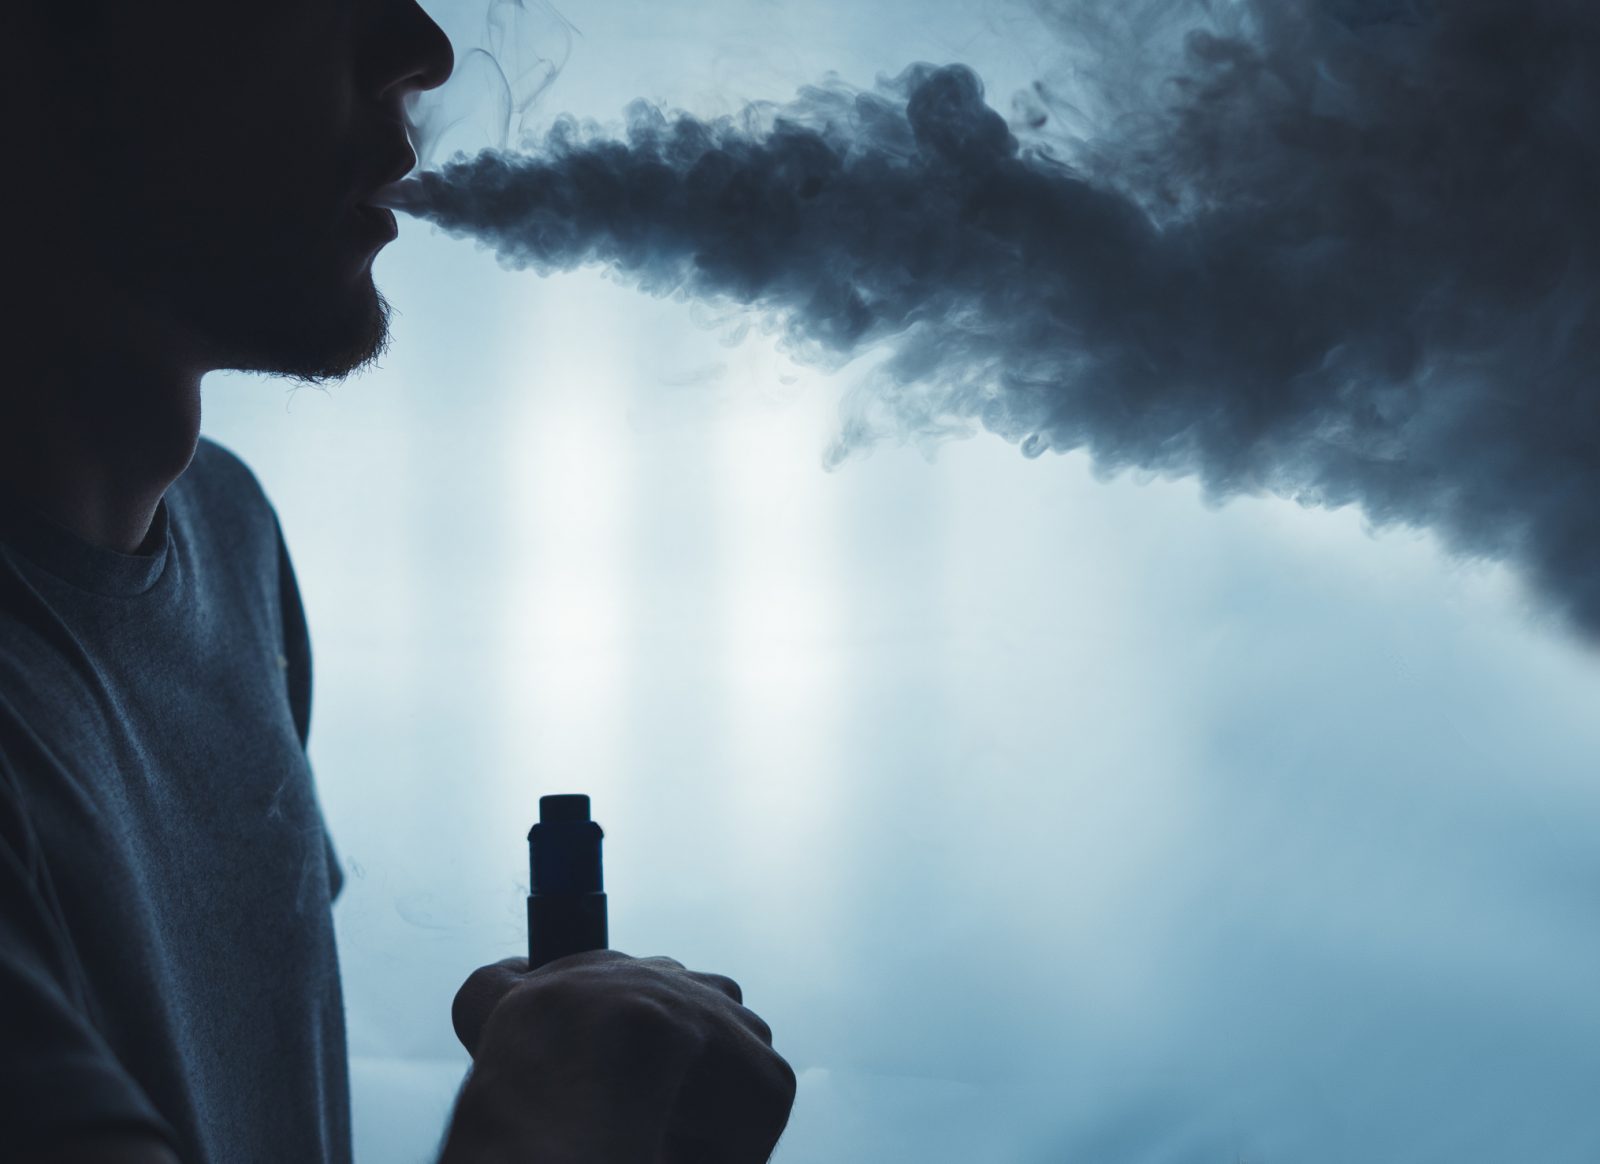 URGENT- Outbreak of Lung Injury Associated with E-Cigarette Use, or Vaping